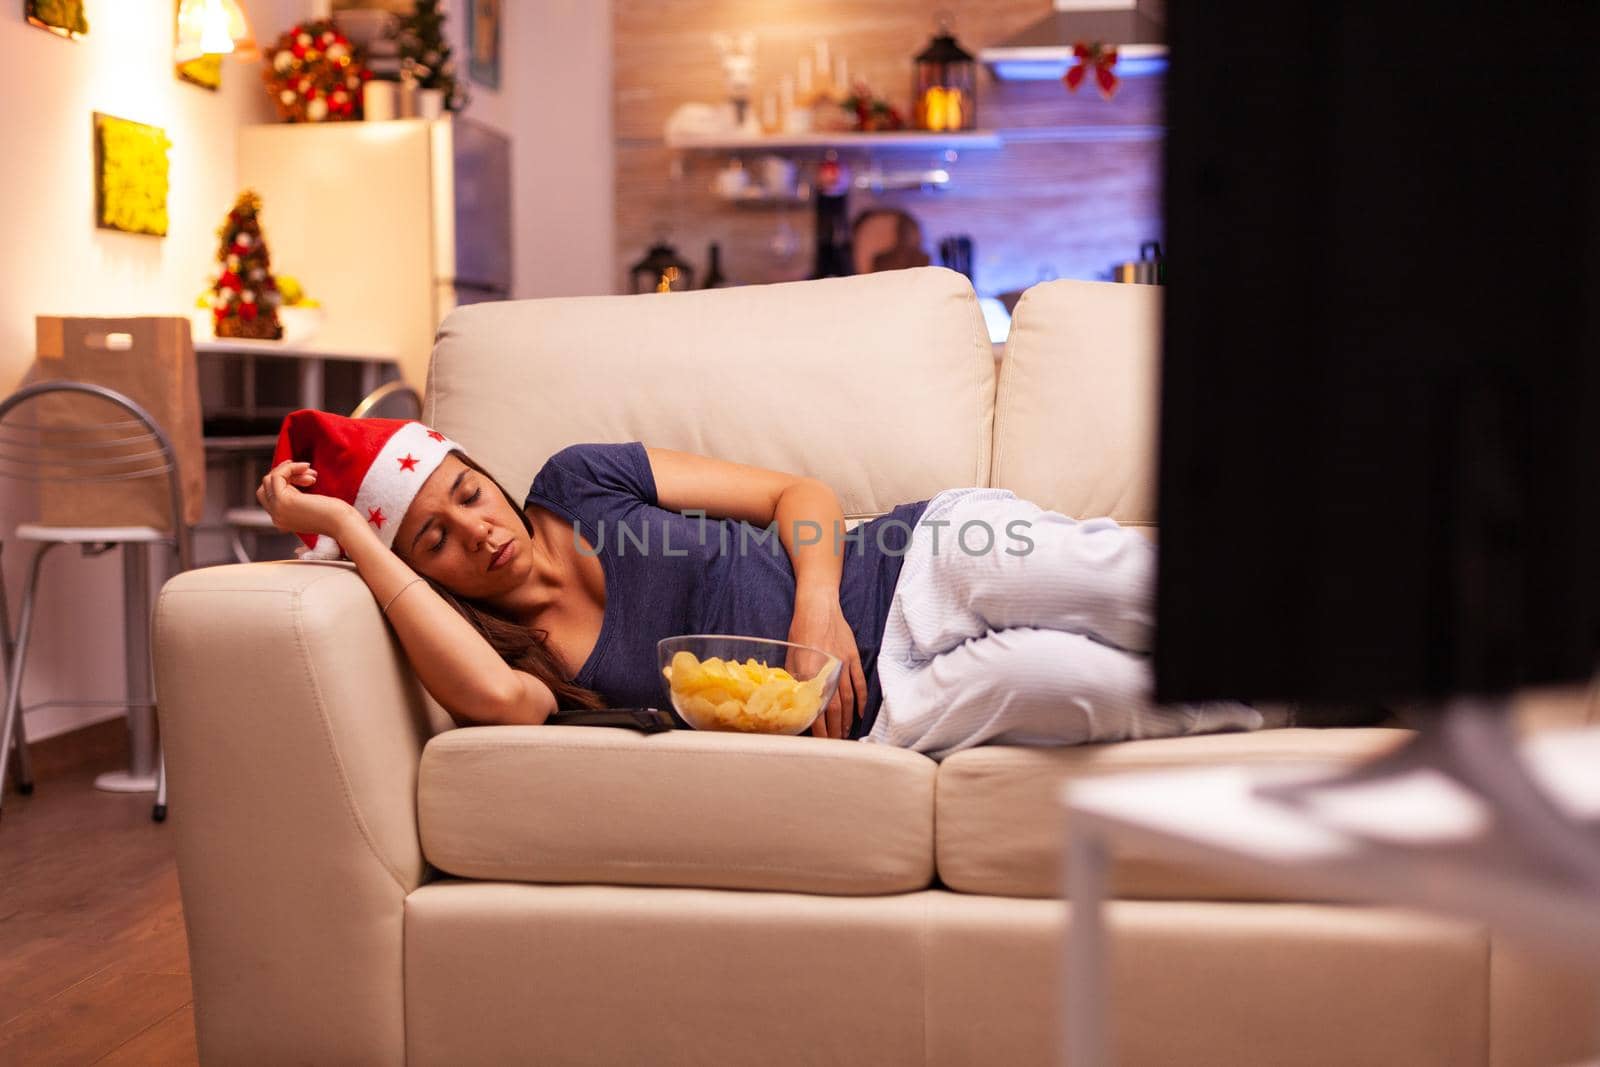 Girl falling asleep on sofa in xmas decorated kitchen after watching winter movie on television. Caucasian female with red santa hat enjoying christmas holiday. X-mas season